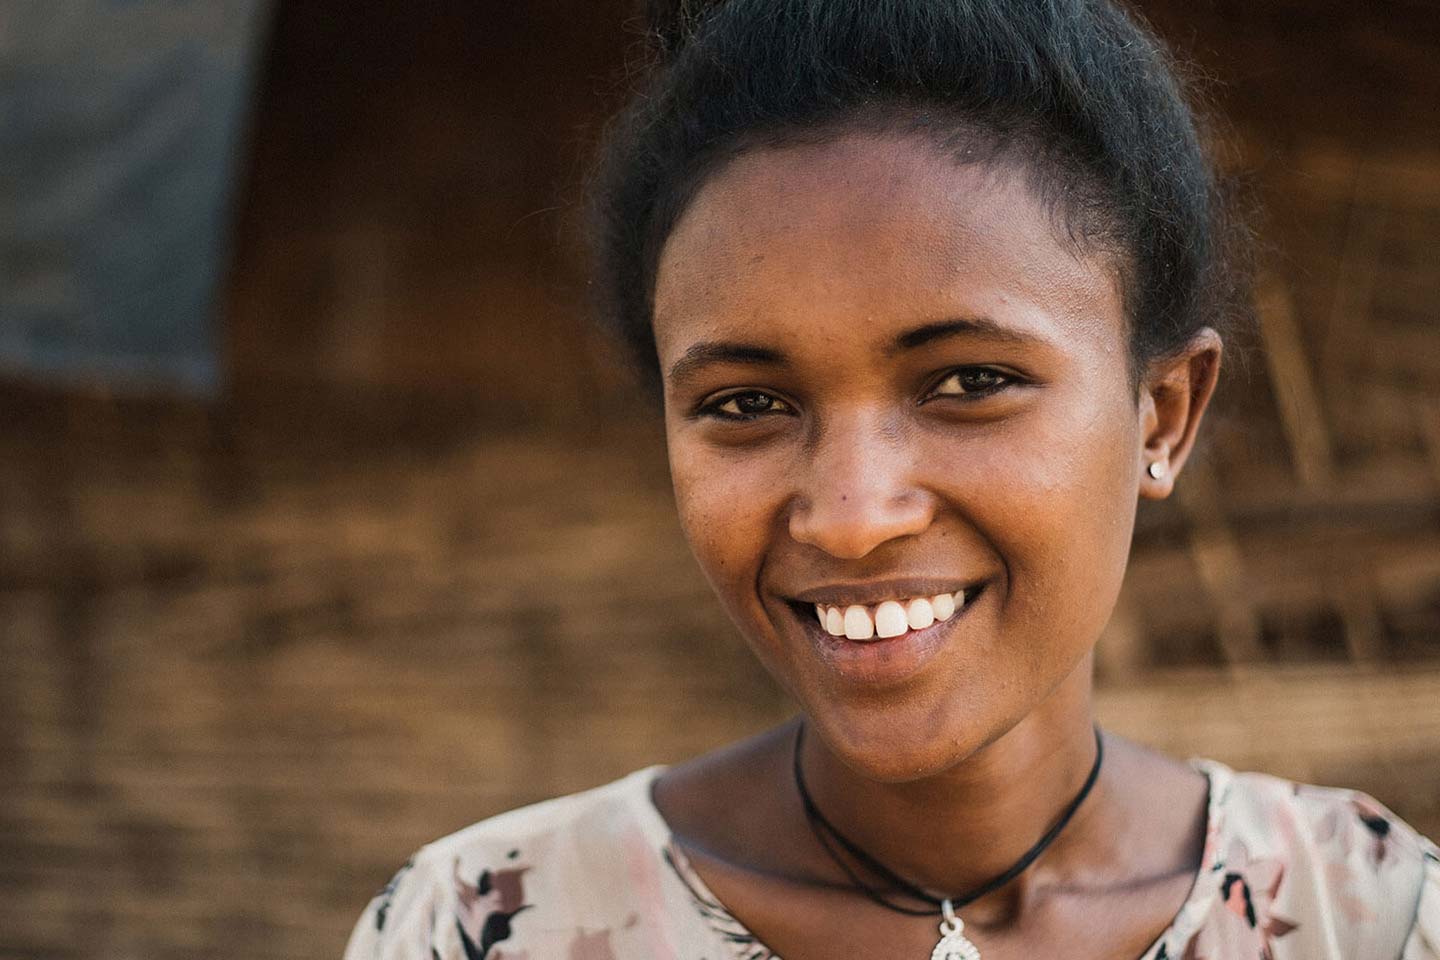 Helping rural and urban girls across Ethiopia understand cervical cancer an...